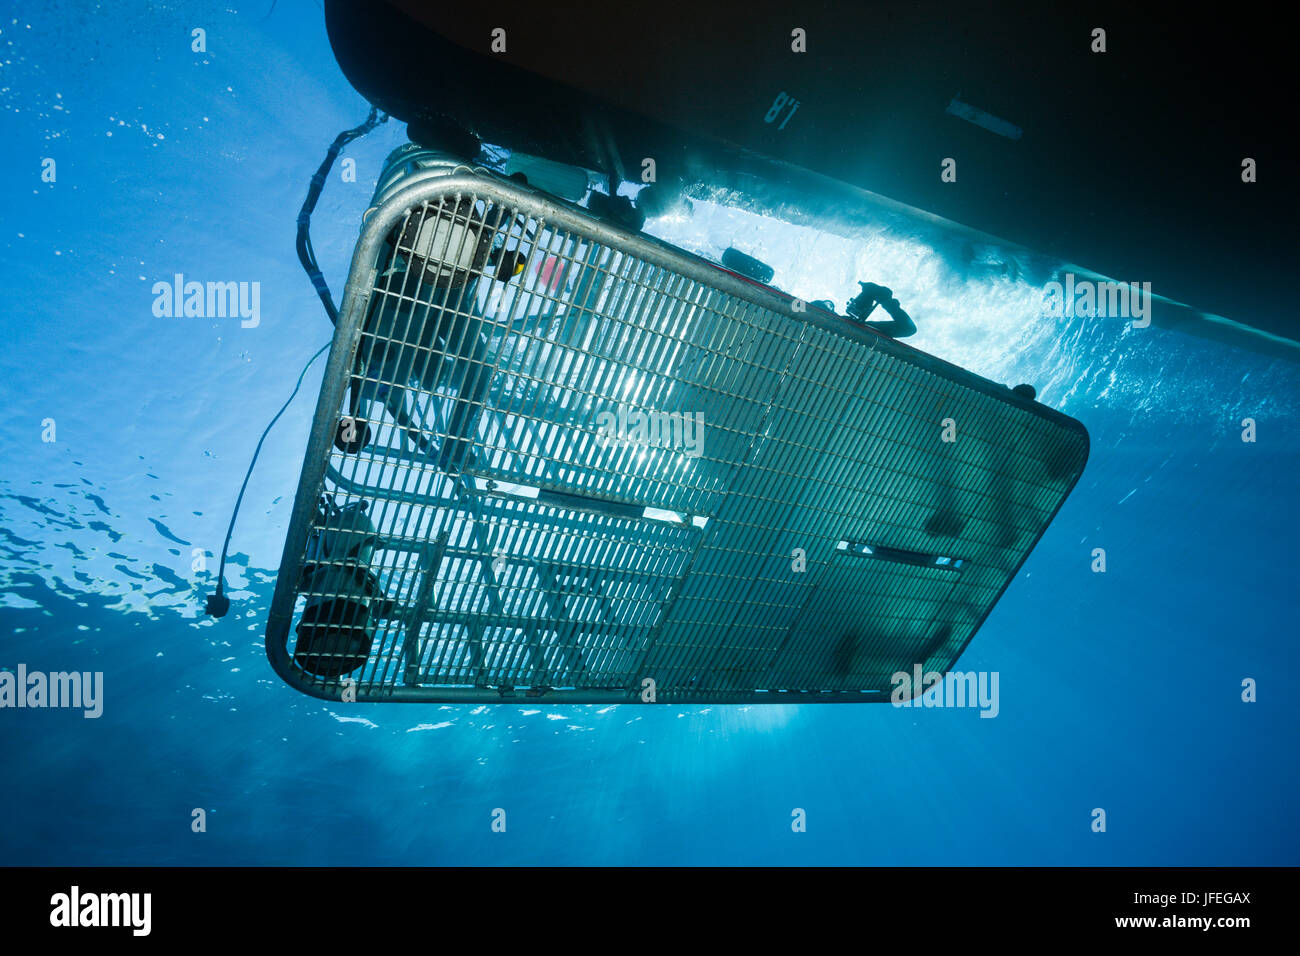 Cage diving with the Great white shark, Guadalupe Island, Mexico Stock Photo